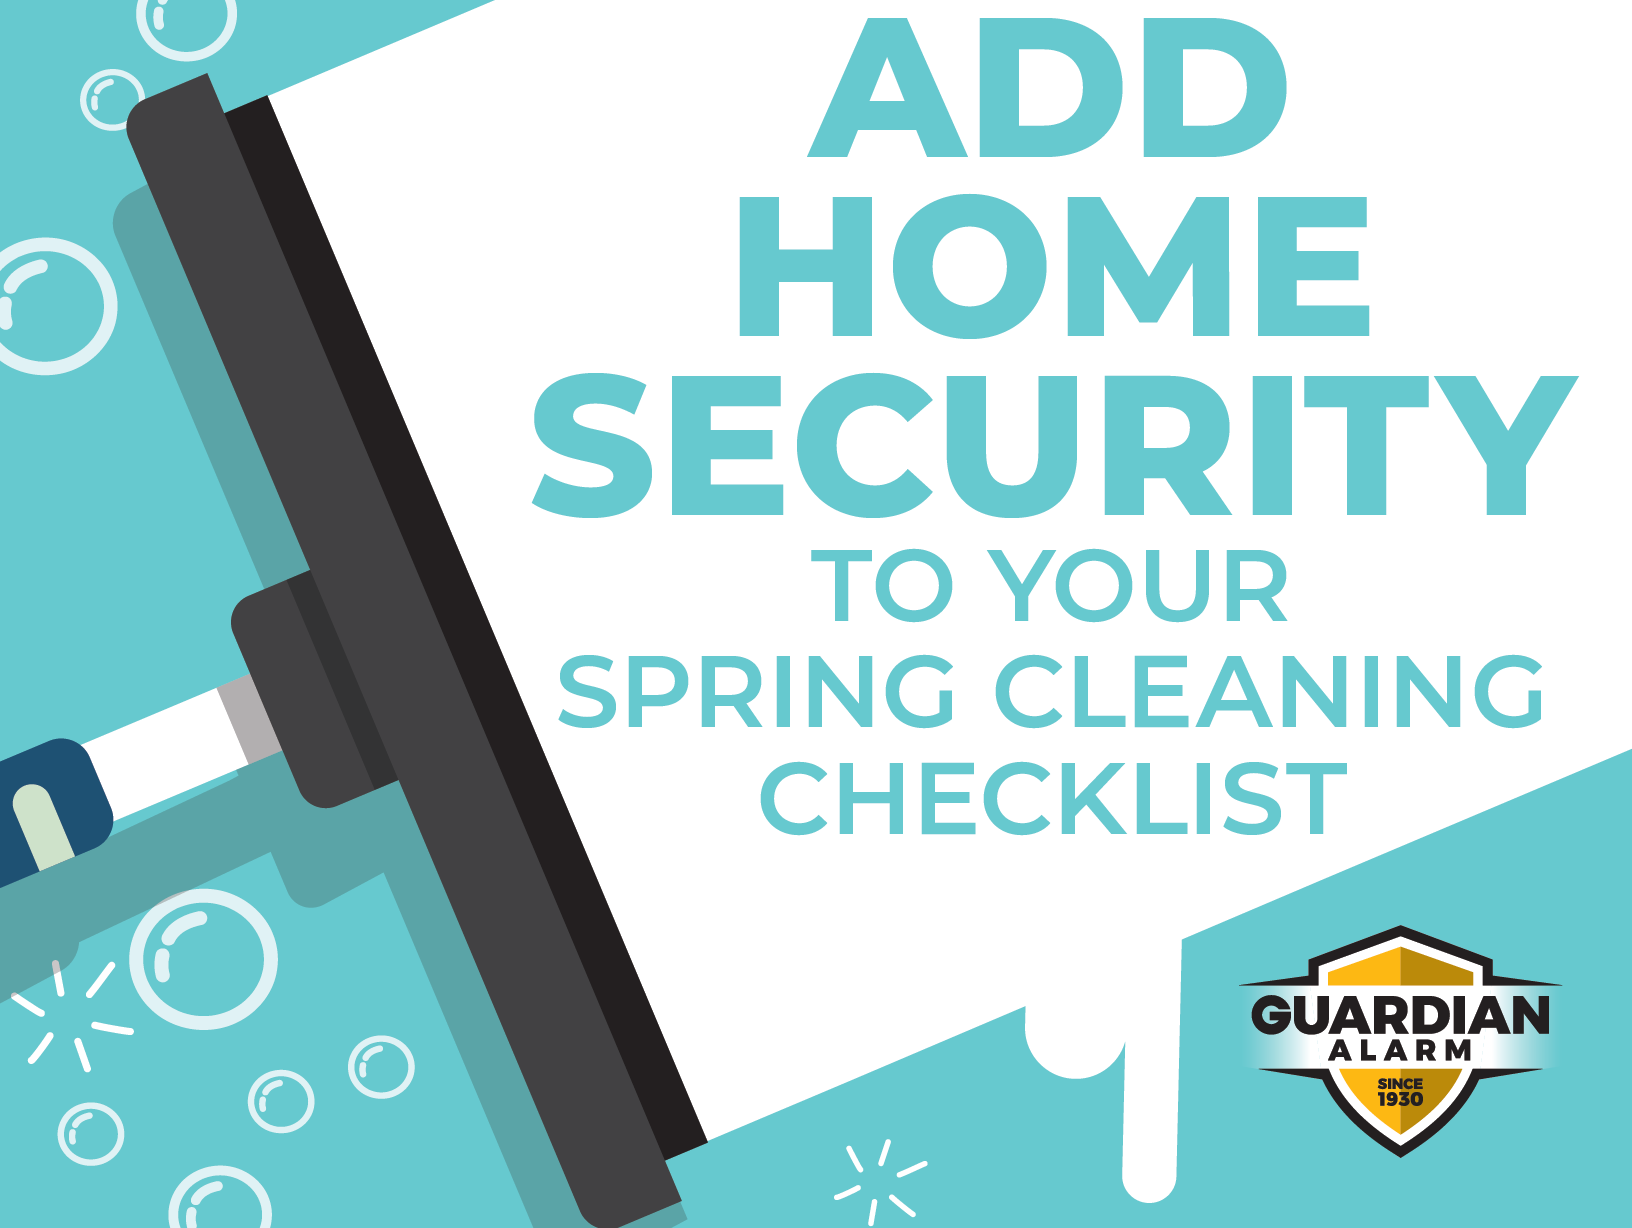 Add home security to your spring cleaning checklist